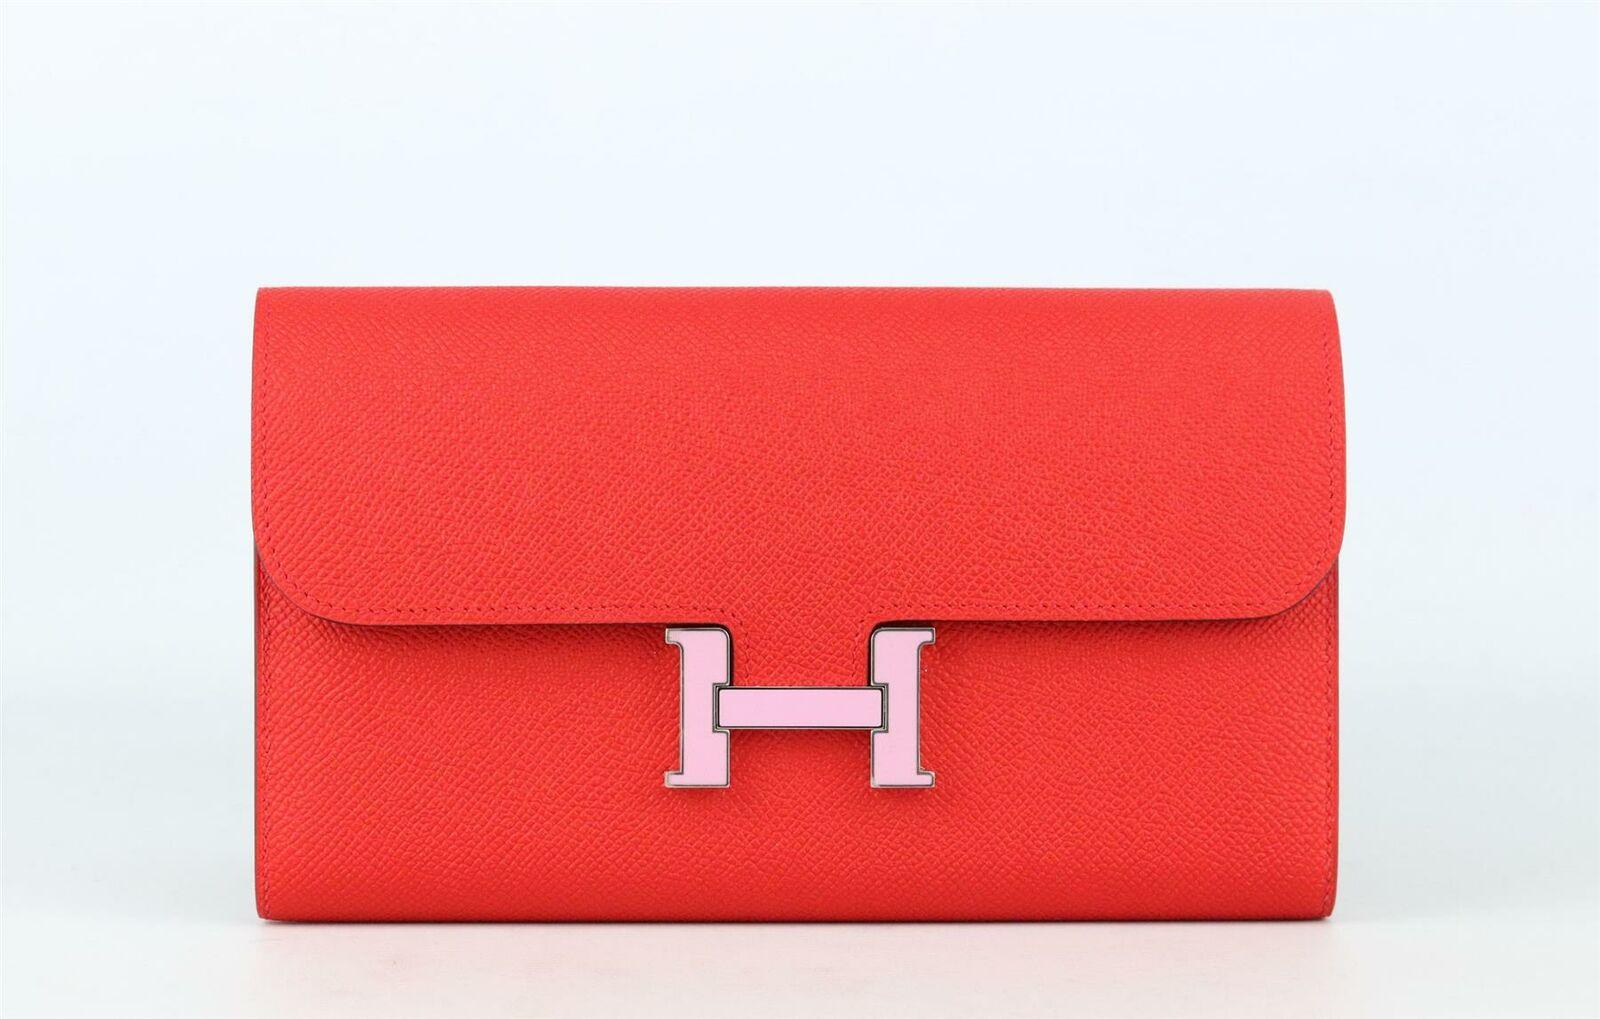 Made in France, this beautiful 2019 Hermès ‘Bearn Compact’ wallet has been made from textured Epsom leather exterior in ‘Rouge de Coeur’ and soft leather interior, it is decorated with the iconic ‘H’-clasp is made from palladium hardware and enamel